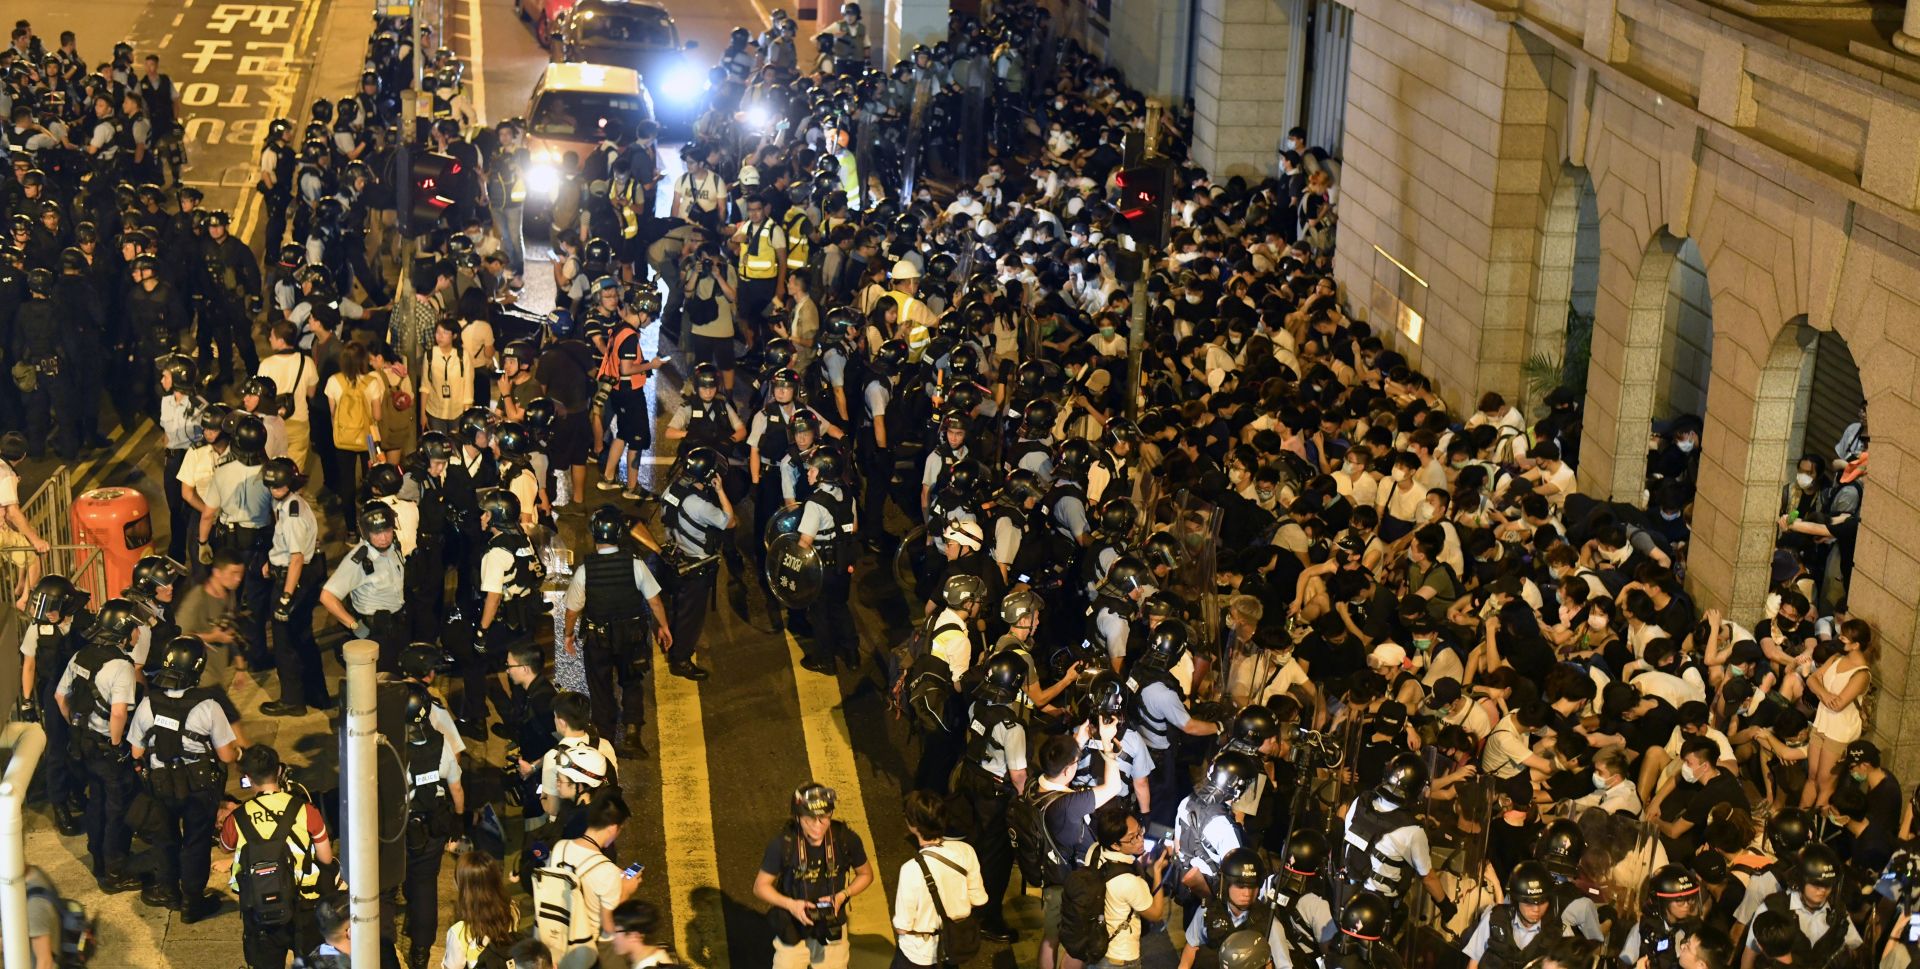 epa07638197 Protesters clash with police after a rally against amendments to an extradition bill in Hong Kong, China, 10 June 2019. Hundreds of thousands of protesters marched through the streets of Hong Kong against the bill on 09 June, in one of the biggest protest the city has seen in more than 20 years. A controversial extradition bill that would allow the transfer of fugitives to jurisdictions which Hong Kong does not have a treaty with, including mainland China has sparked the protest.  EPA/EDWIN KWOK